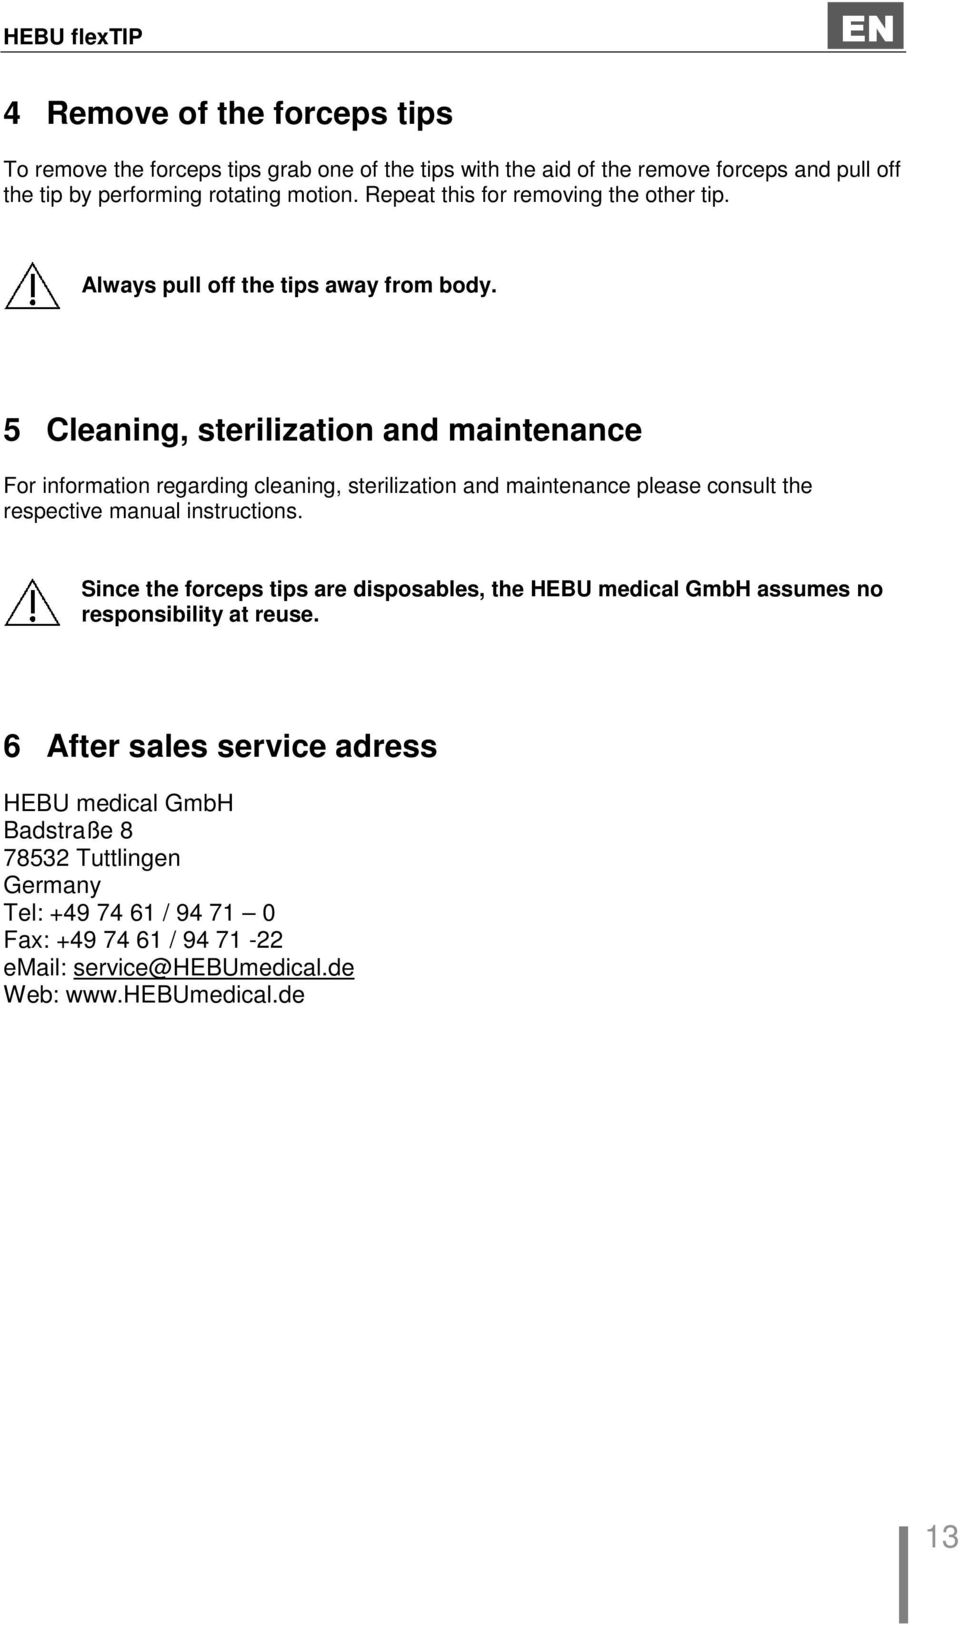 5 Cleaning, sterilization and maintenance For information regarding cleaning, sterilization and maintenance please consult the respective manual instructions.